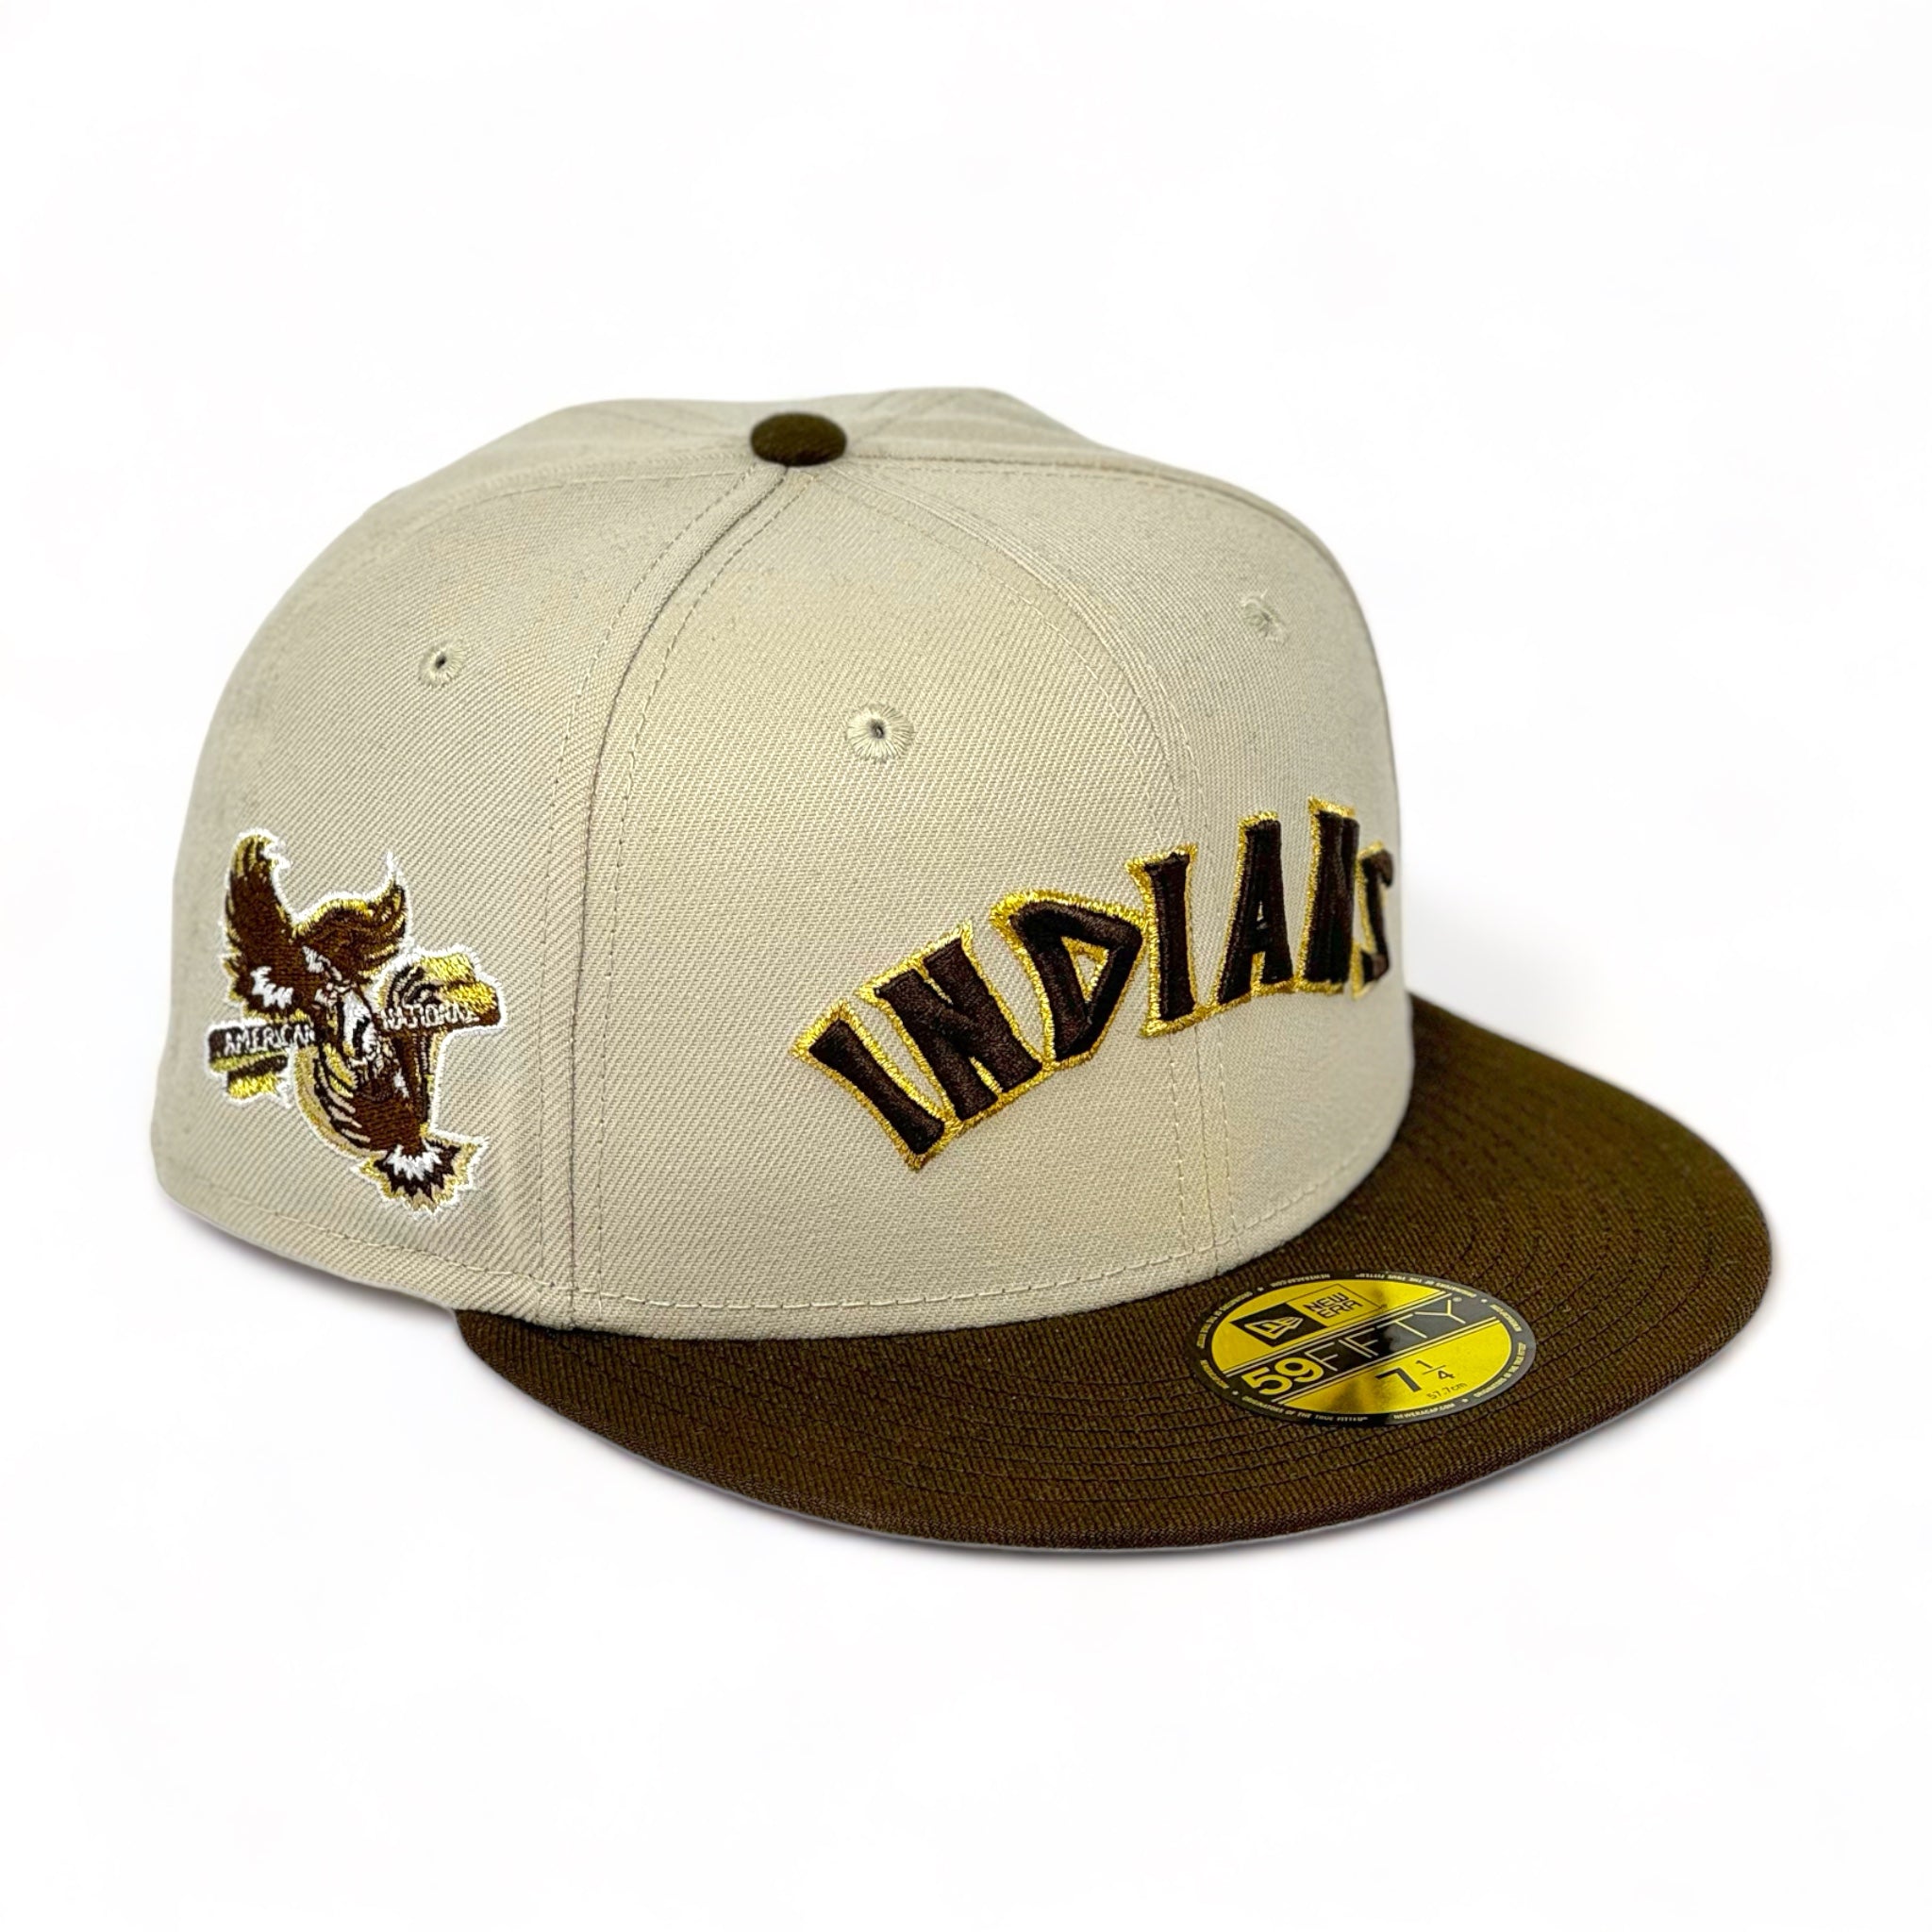 CLEVELAND INDIANS INTERLEAGUE PLAY NEW ERA 59FIFTY FITTED